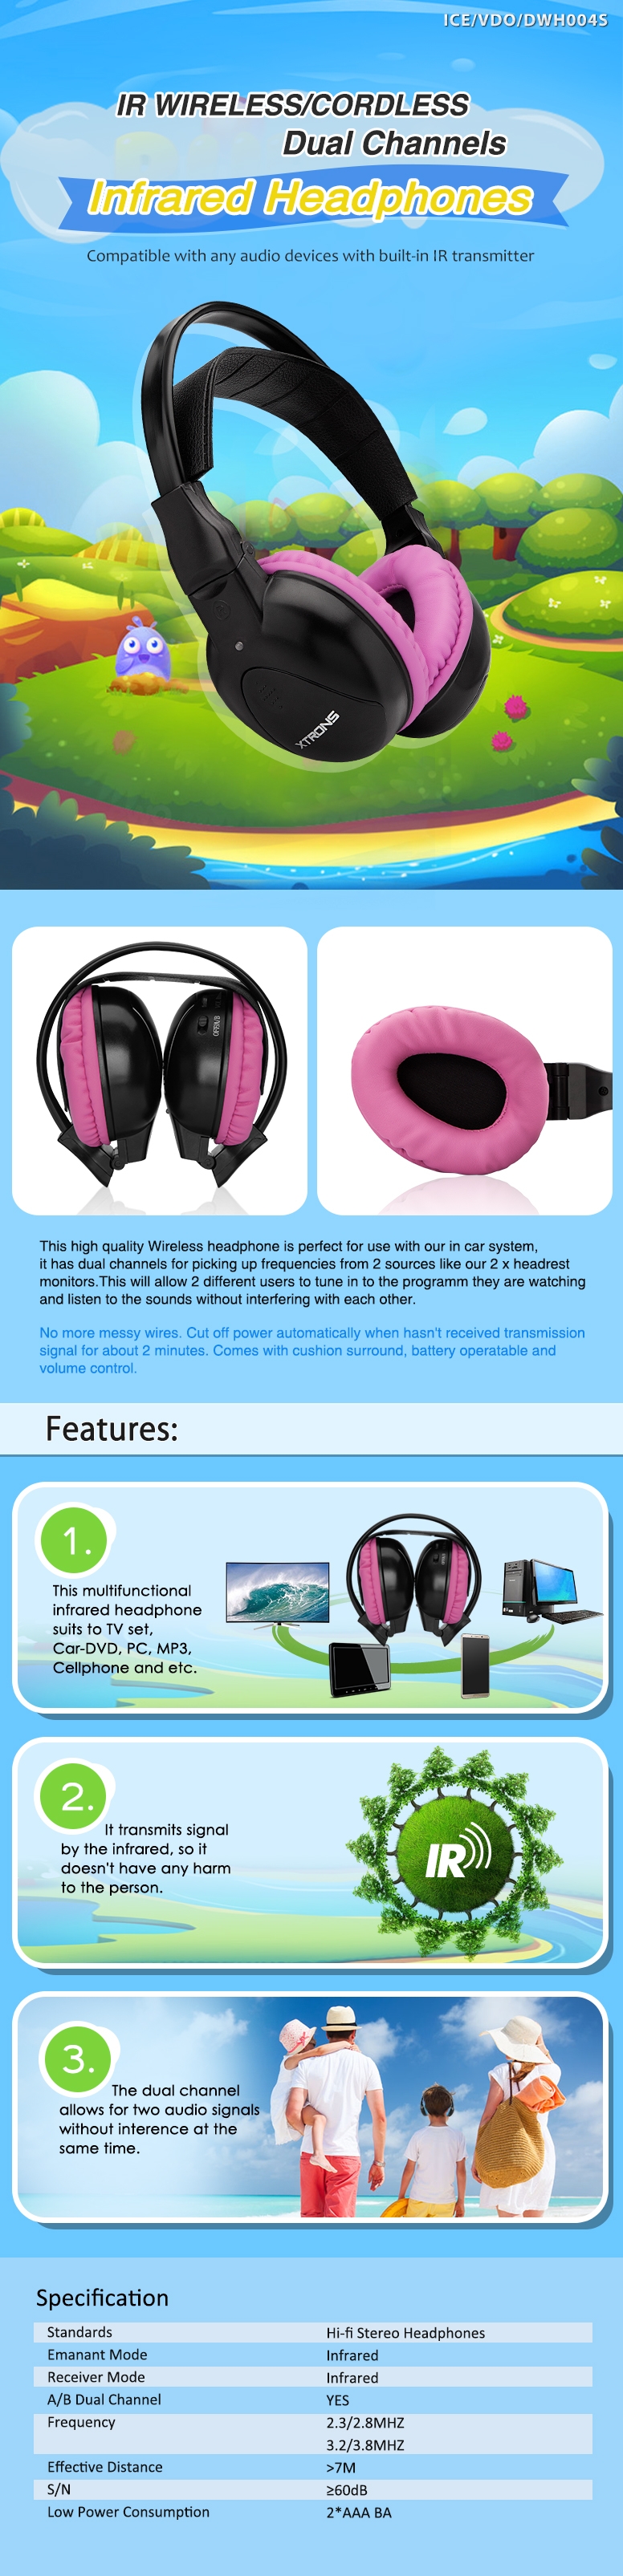 Especially for Kids! Wireless IR Infrared Headphones for Headrest Players and Overhead Monitors Xtrons DWH004S